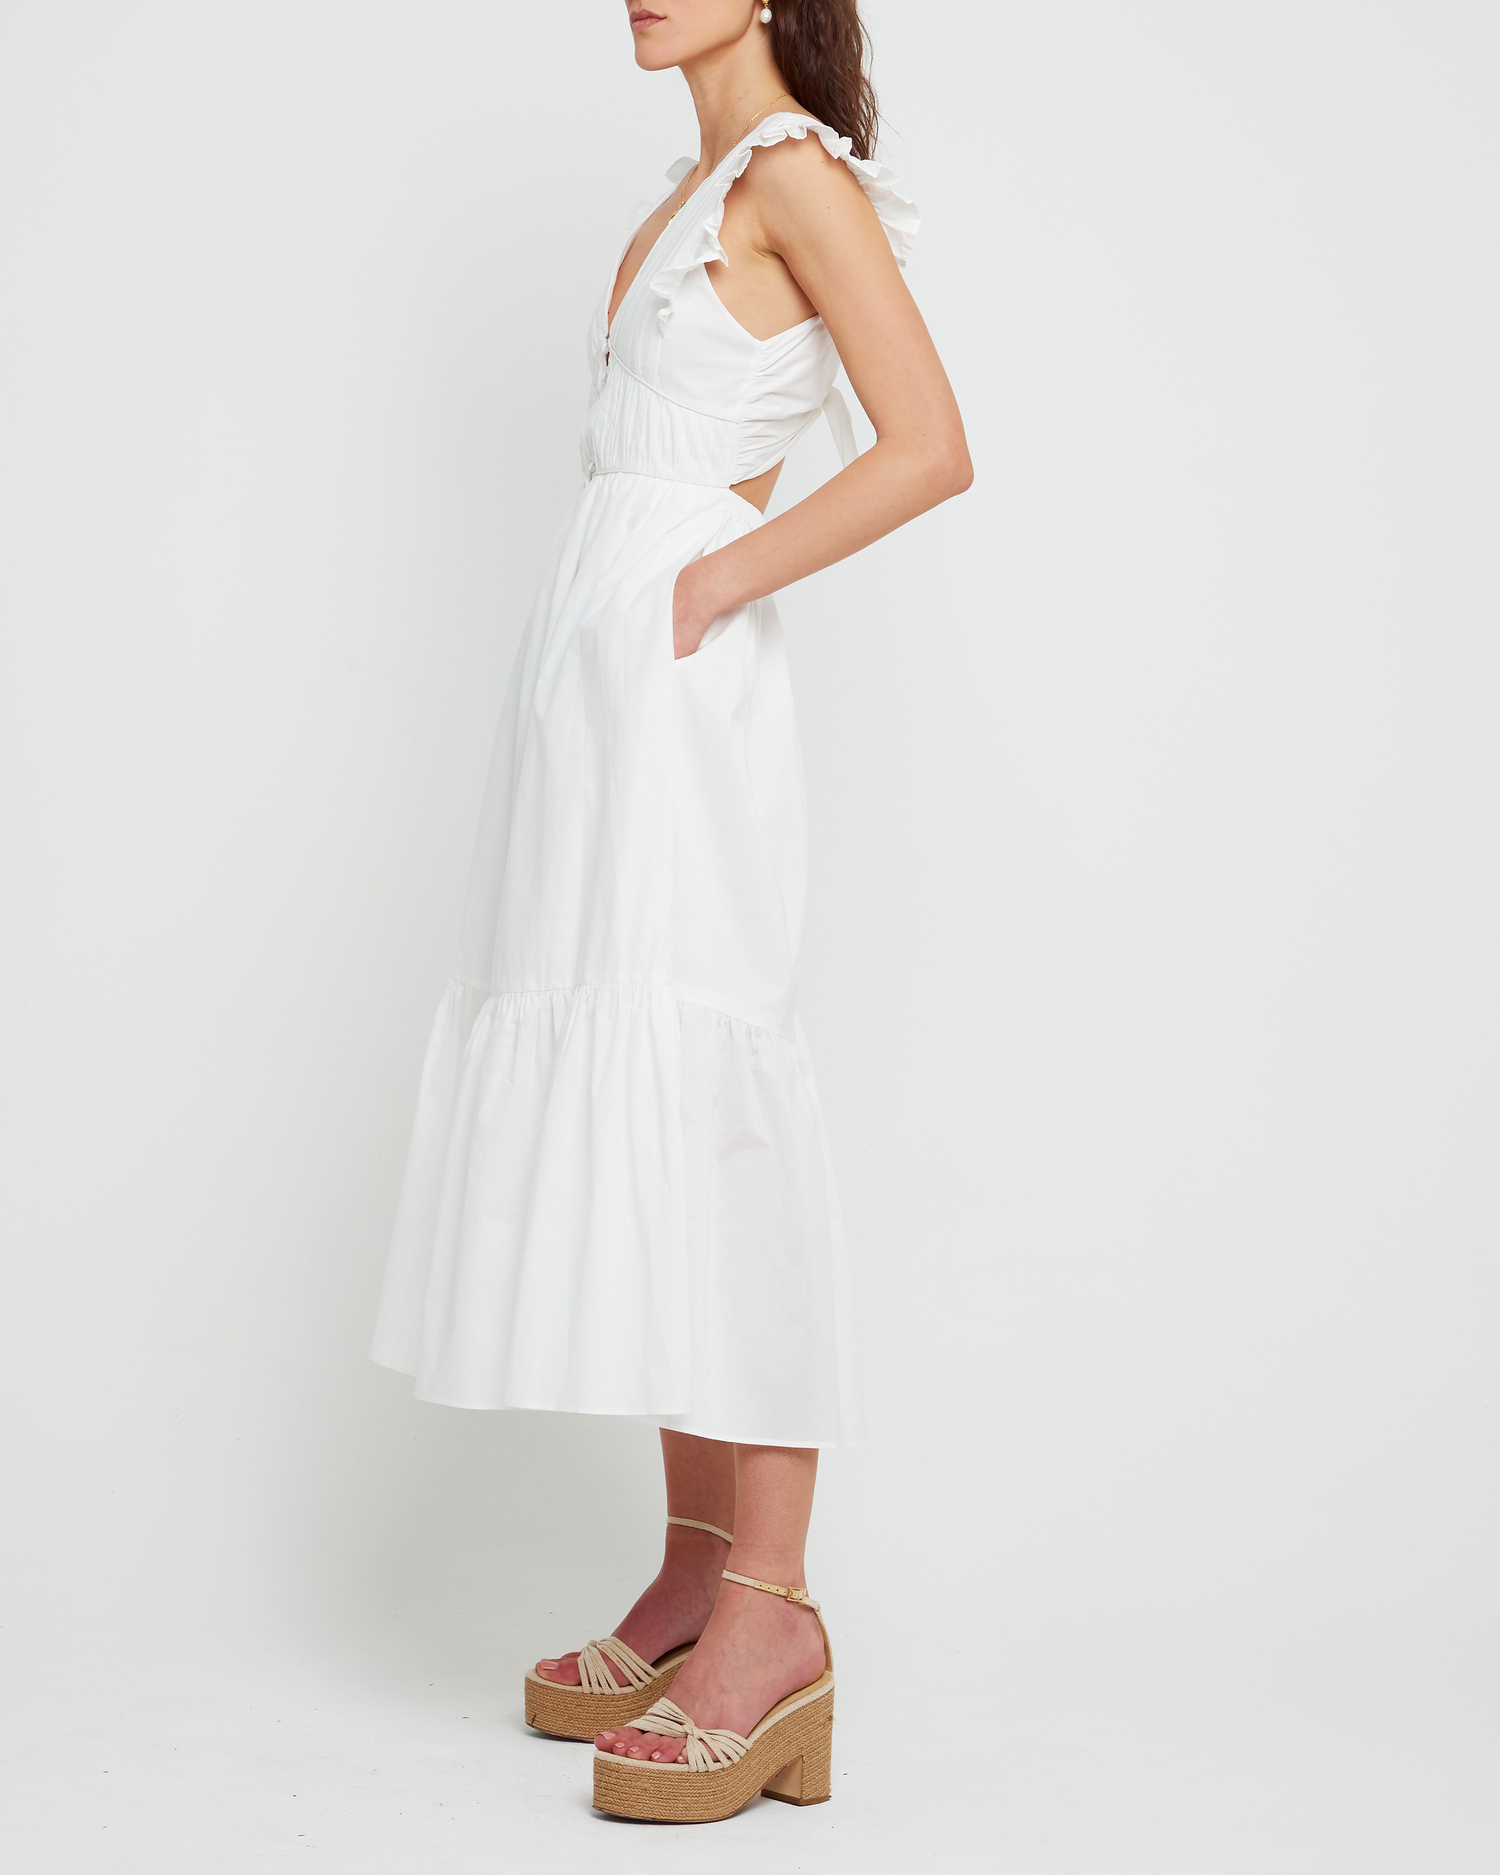 Third image of Stella Dress, a white midi dress, front buttons, ruffle sleeve, open back, tiered, tie, ribbon, bow